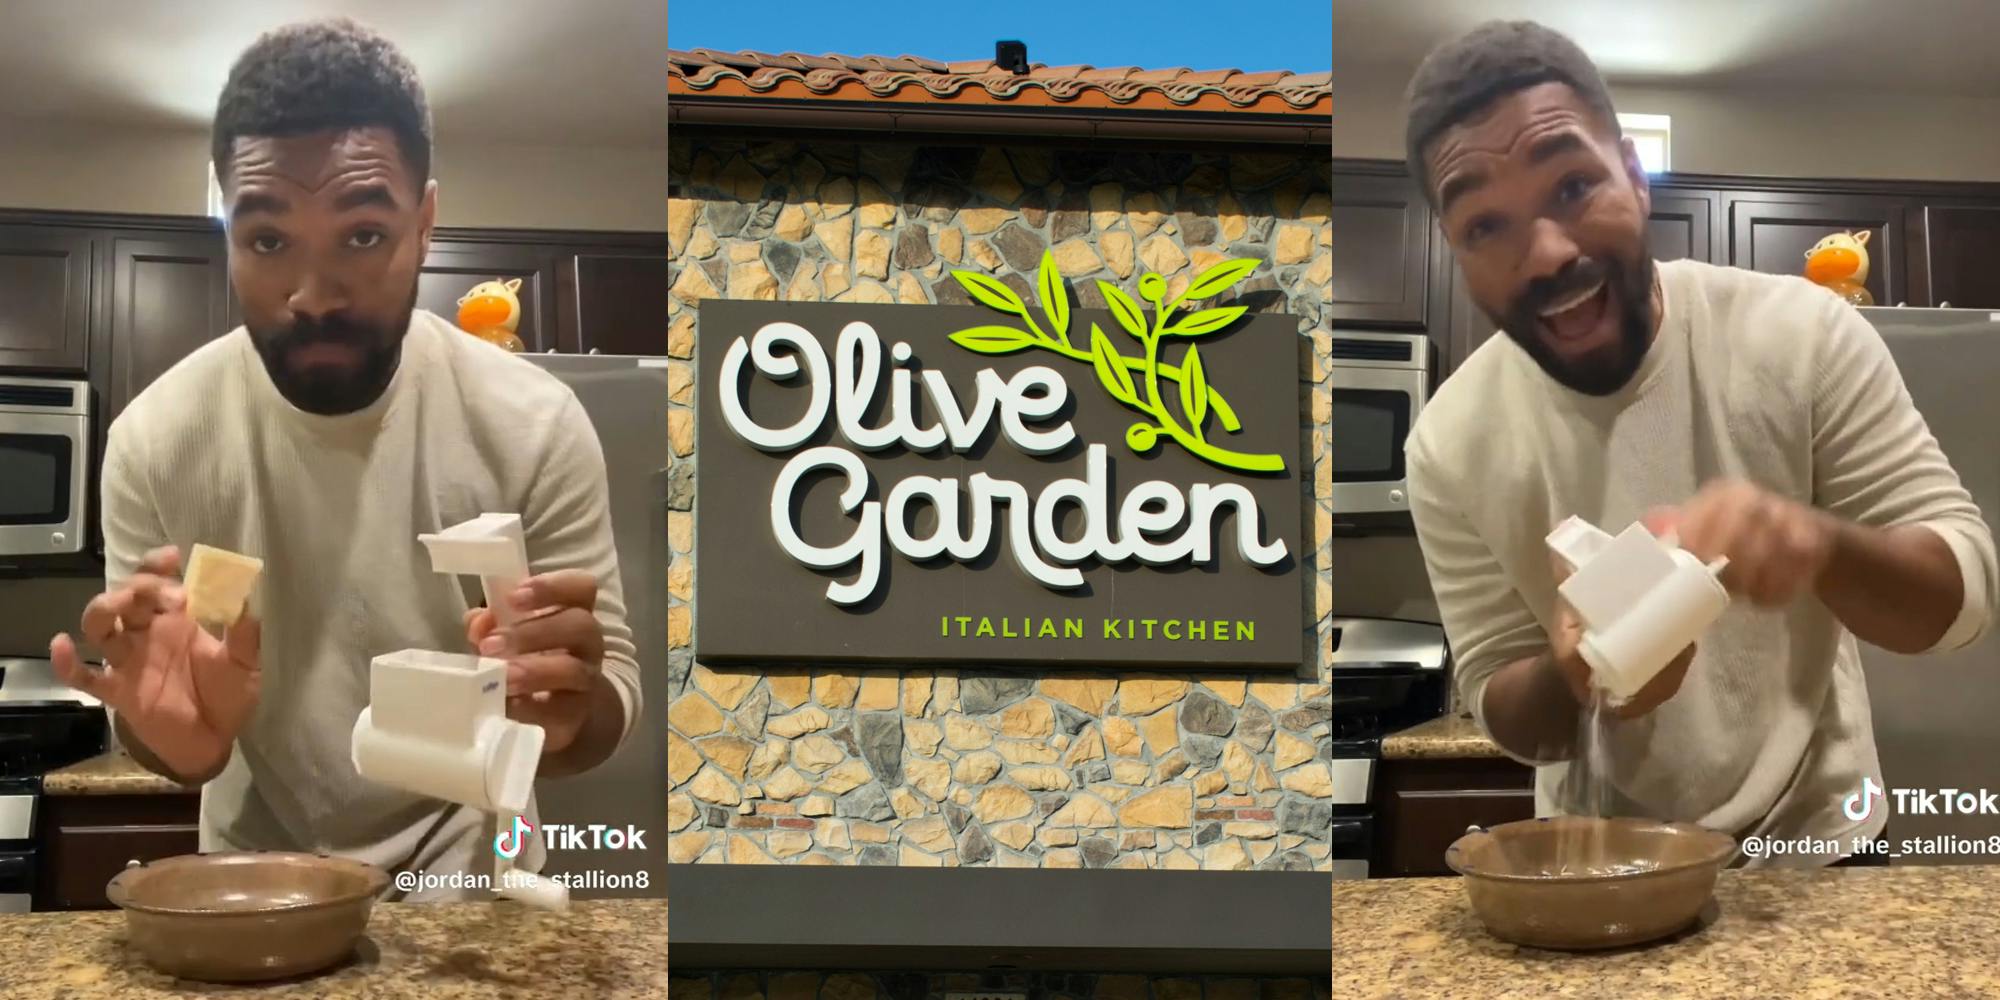 Did y'all know Olive Garden sells their cheese graters?! Game changer! # olivegarden #cheese